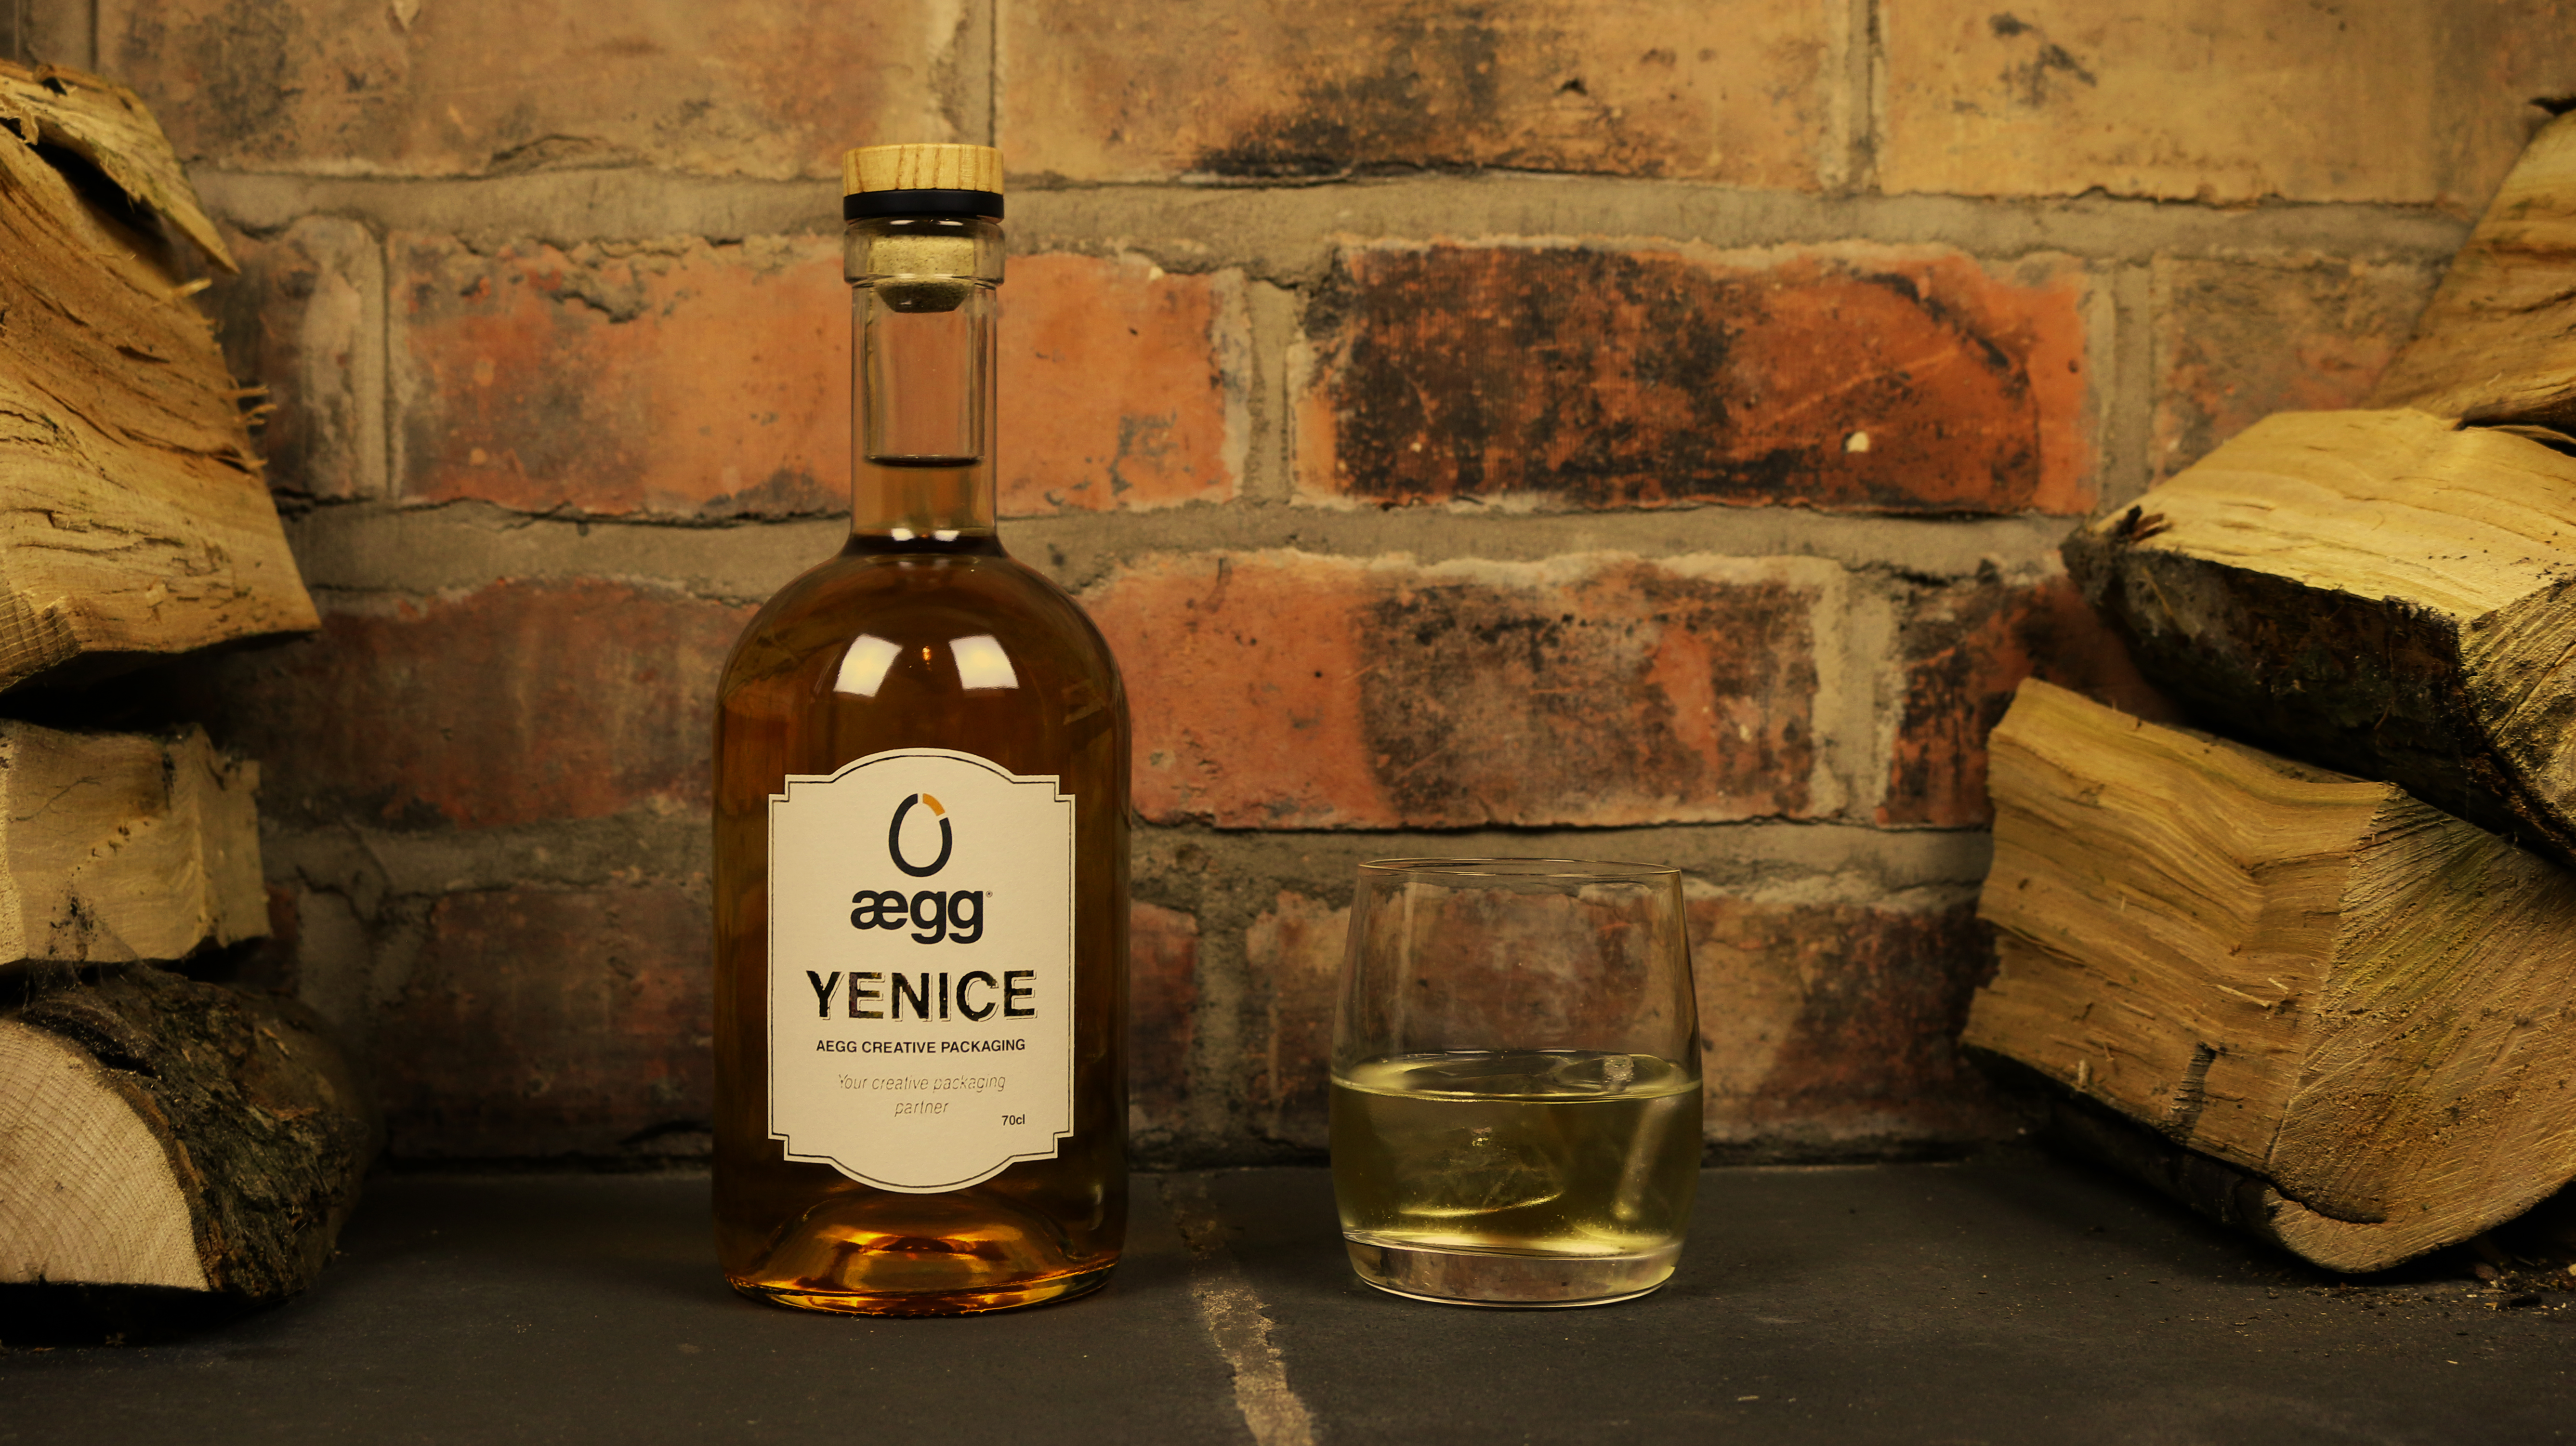 Whisky bottle Yenice from Aegg.  The Yenice bottle is also suitable for a variety of spirits due to its versatile design.